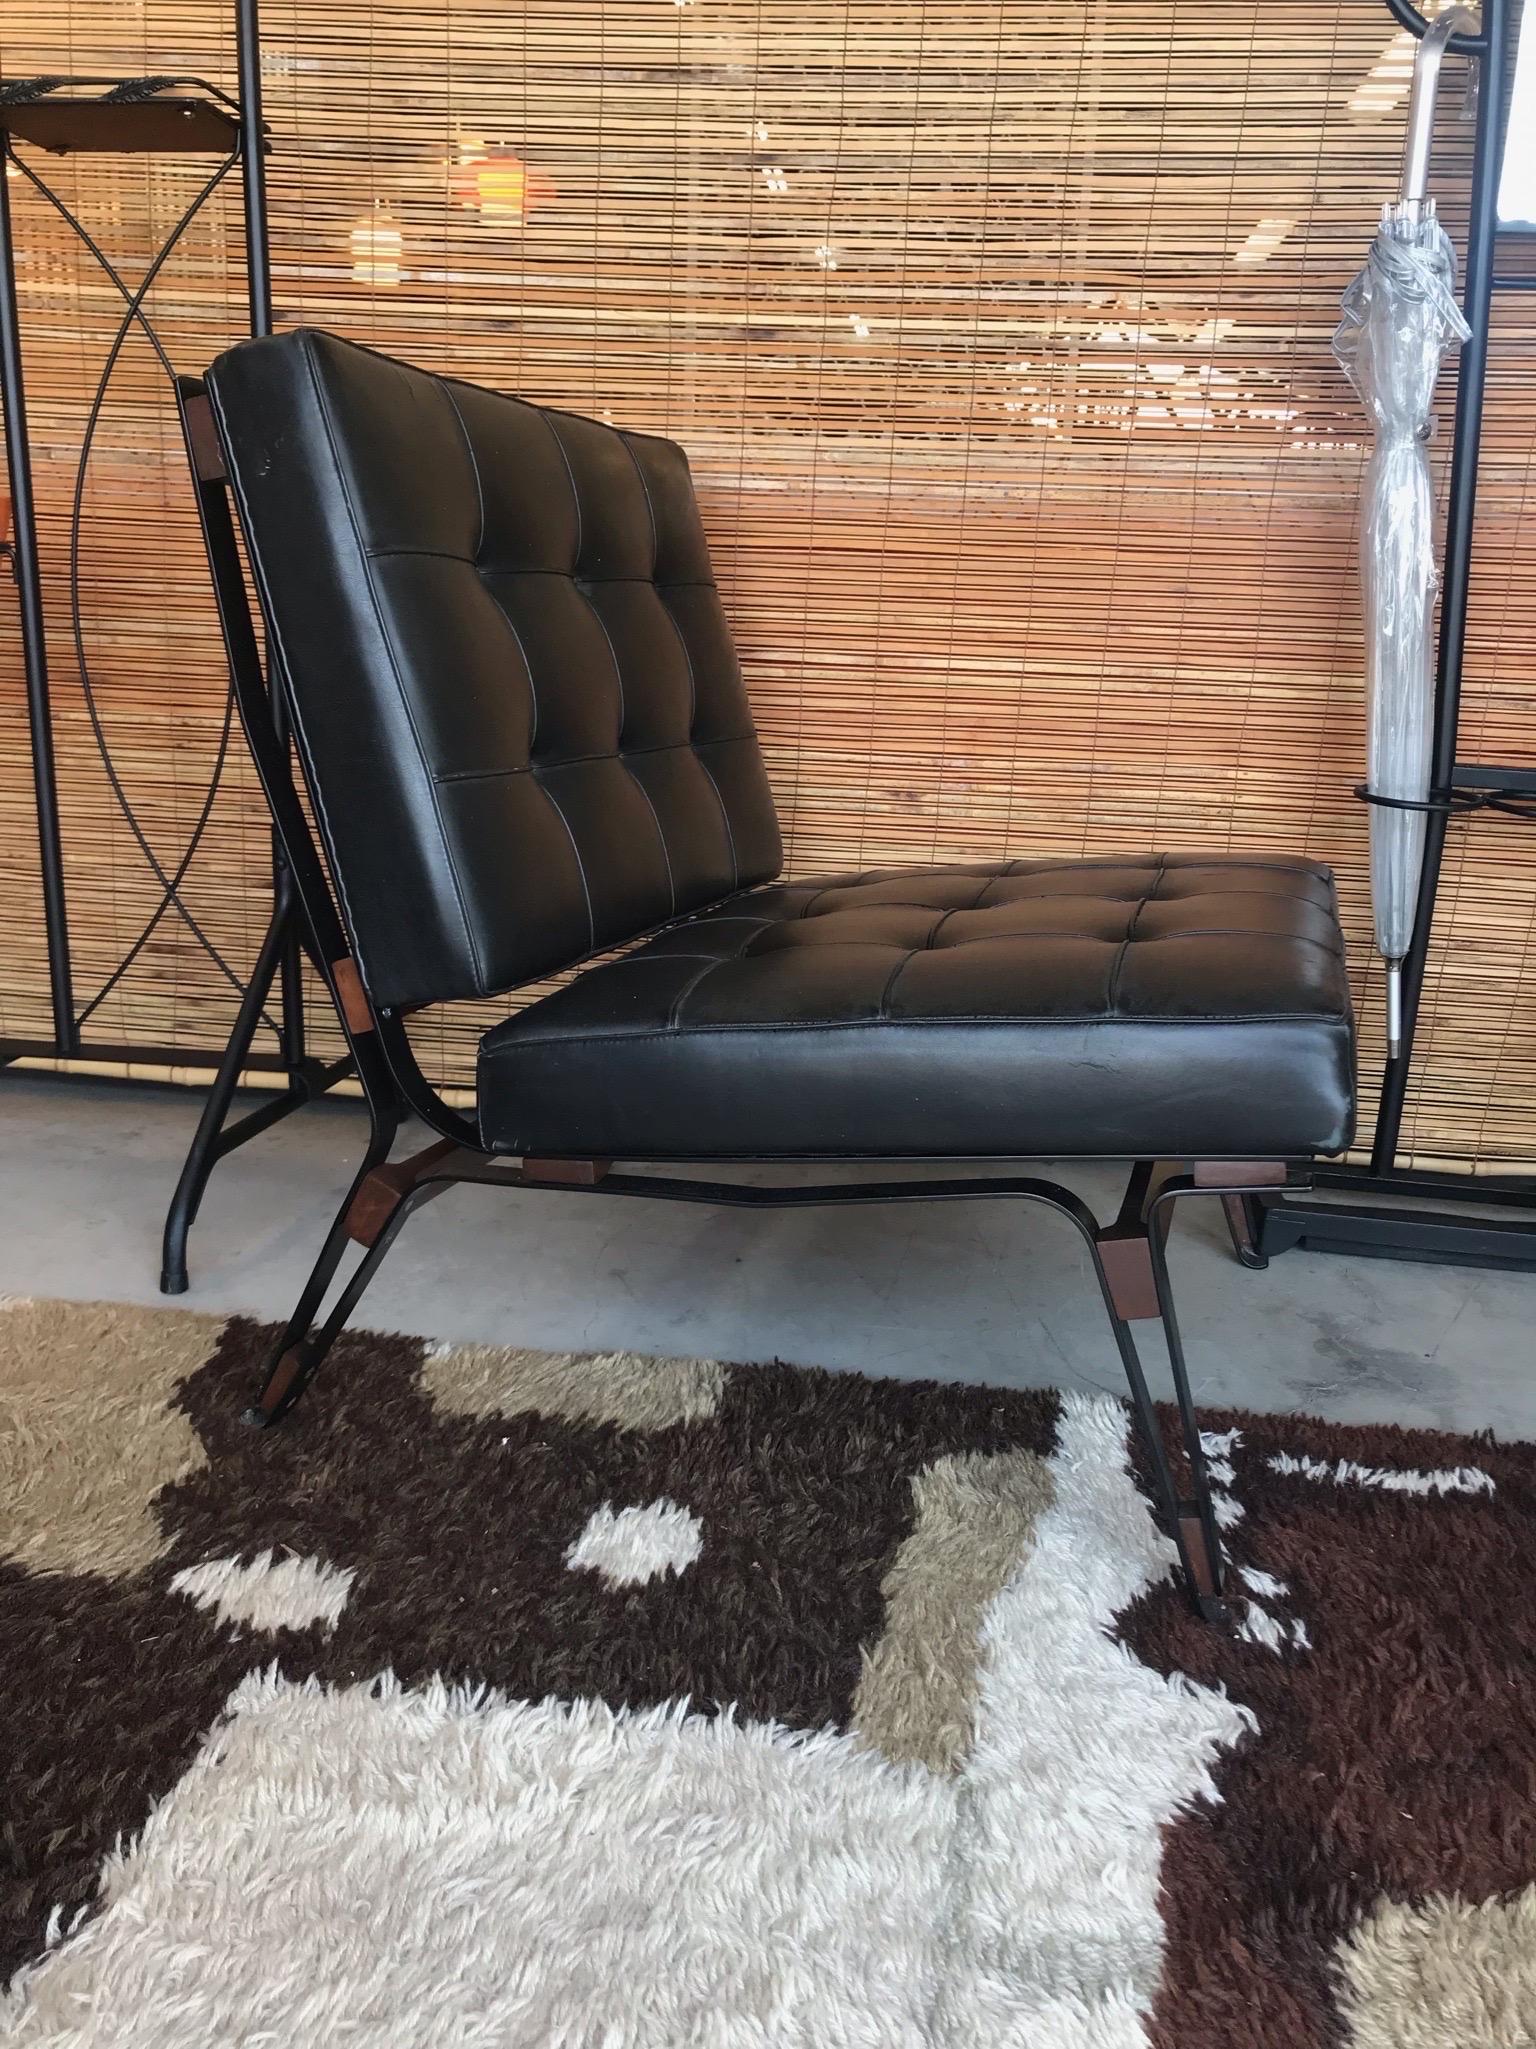 This is a stunning Mid-Century Modern “856” lounge chair designed by Ico Parisi for Cassina, Meda Milan 1957. 
The beautiful design features bent steel frame with solid walnut bracings and original back leather cushions. The original tag is still